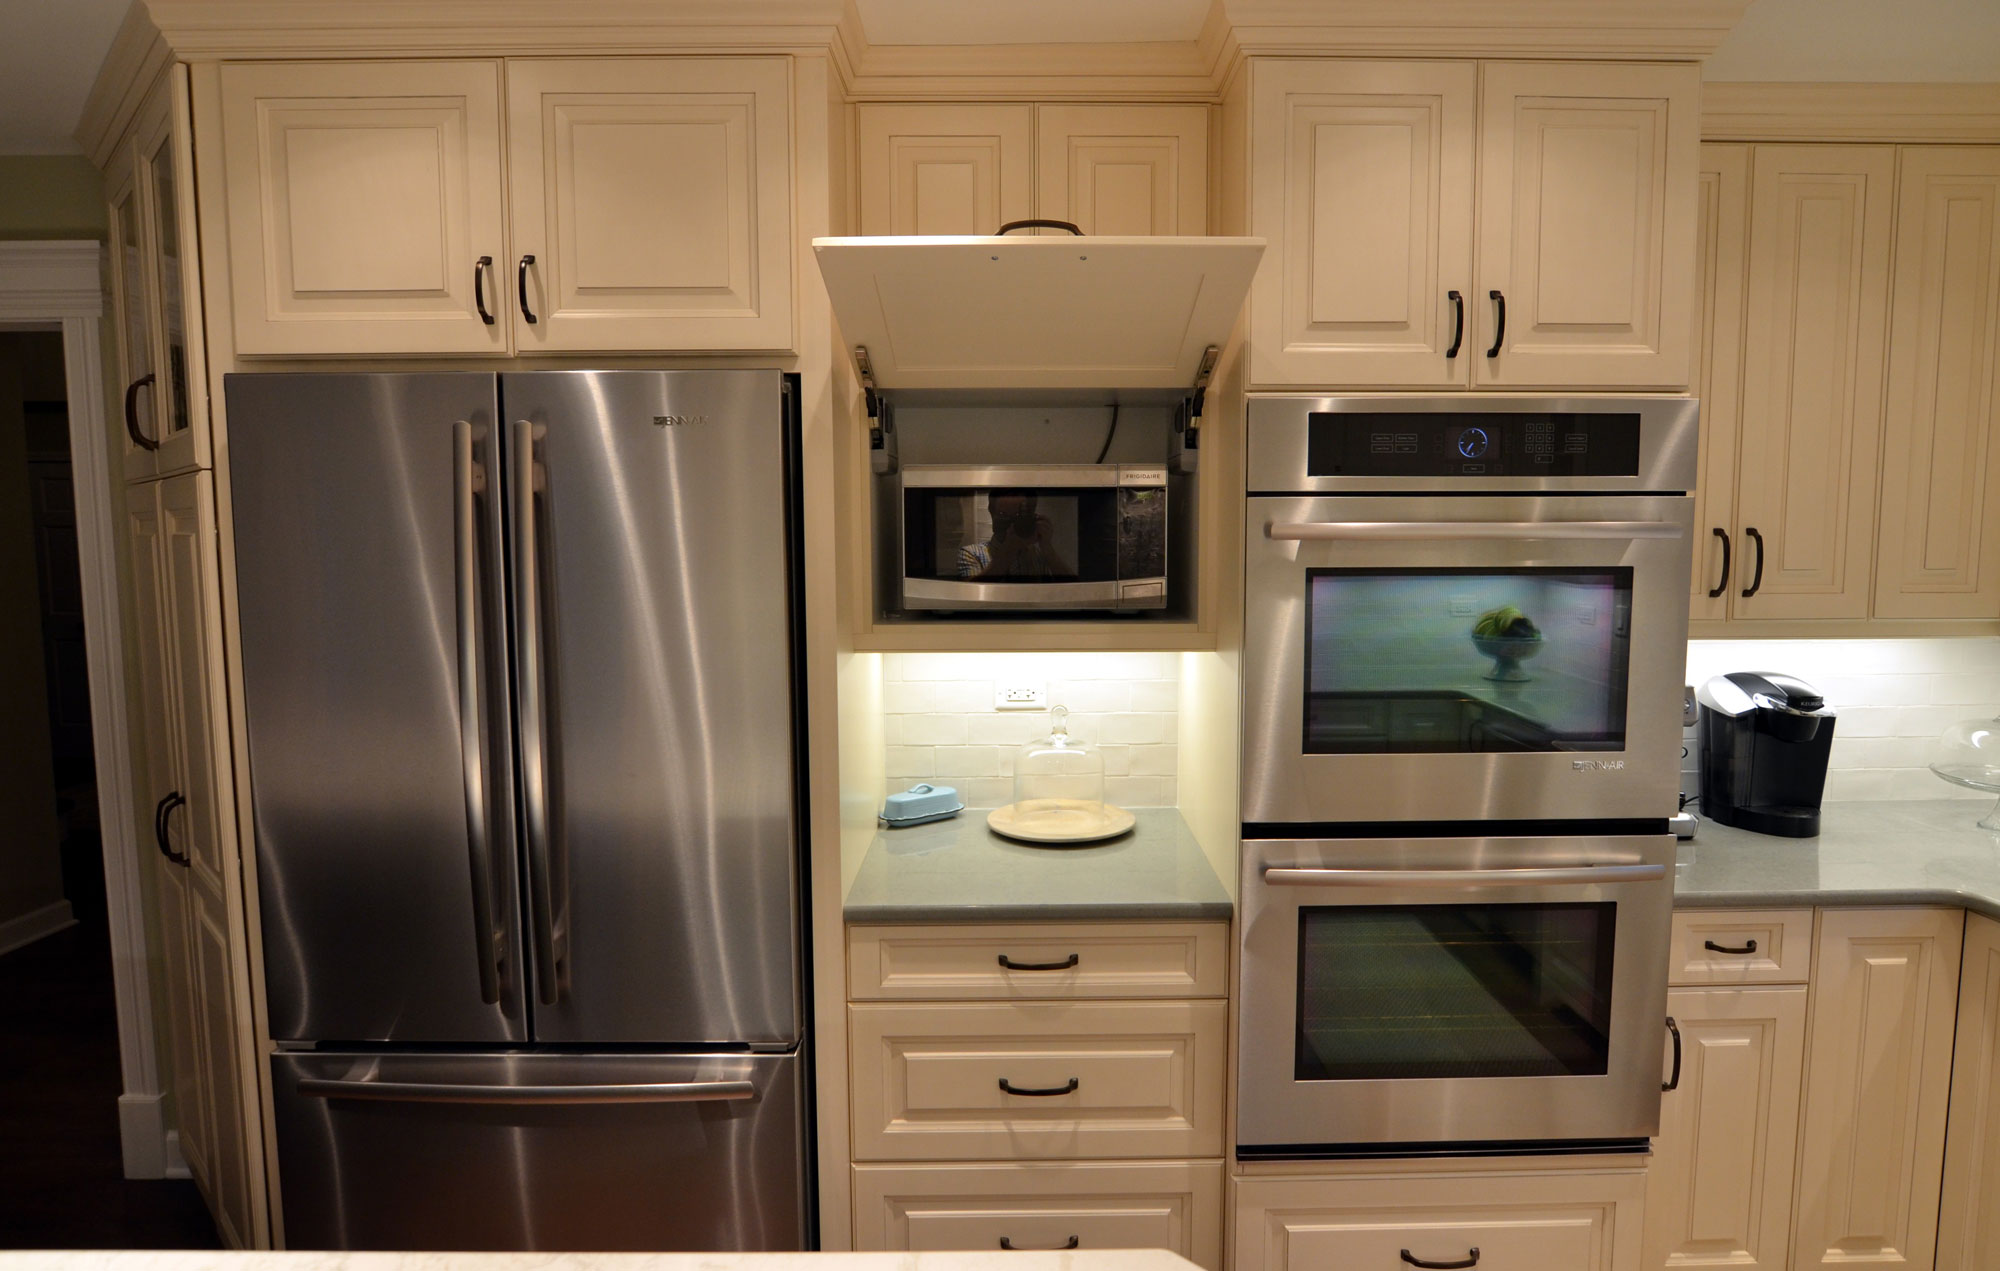 Kitchen remodeling in Naperville, IL. Kitchen ovens, microwave and refrigerator following redesign.